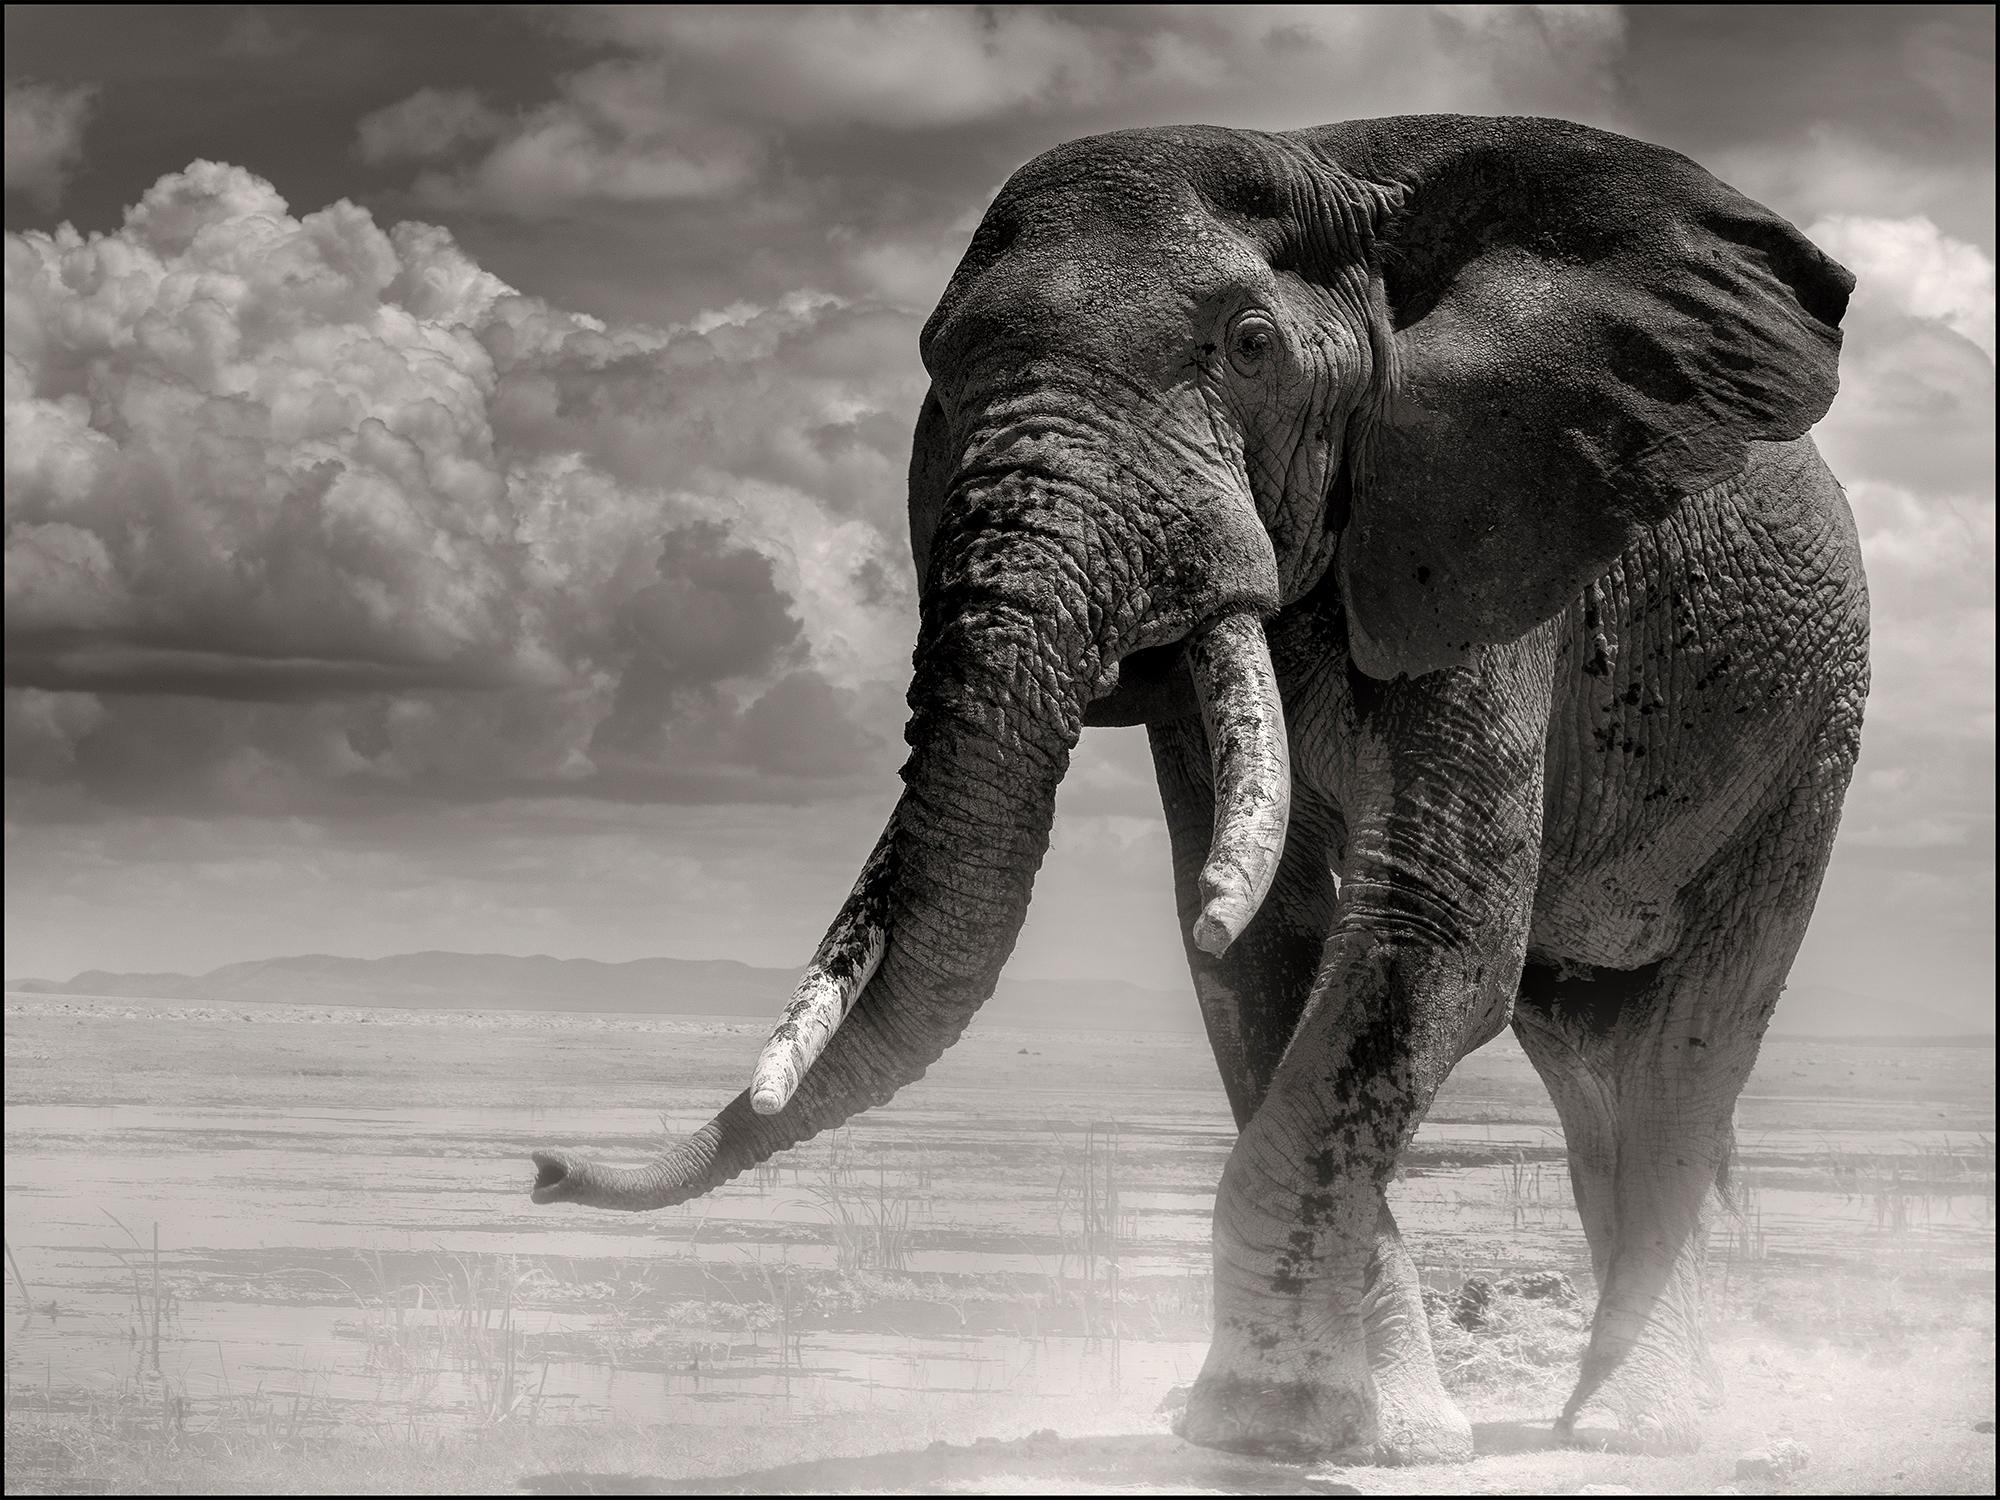 Joachim Schmeisser Landscape Photograph - Elephant bull coming out of the marsh, black and white photography, animal